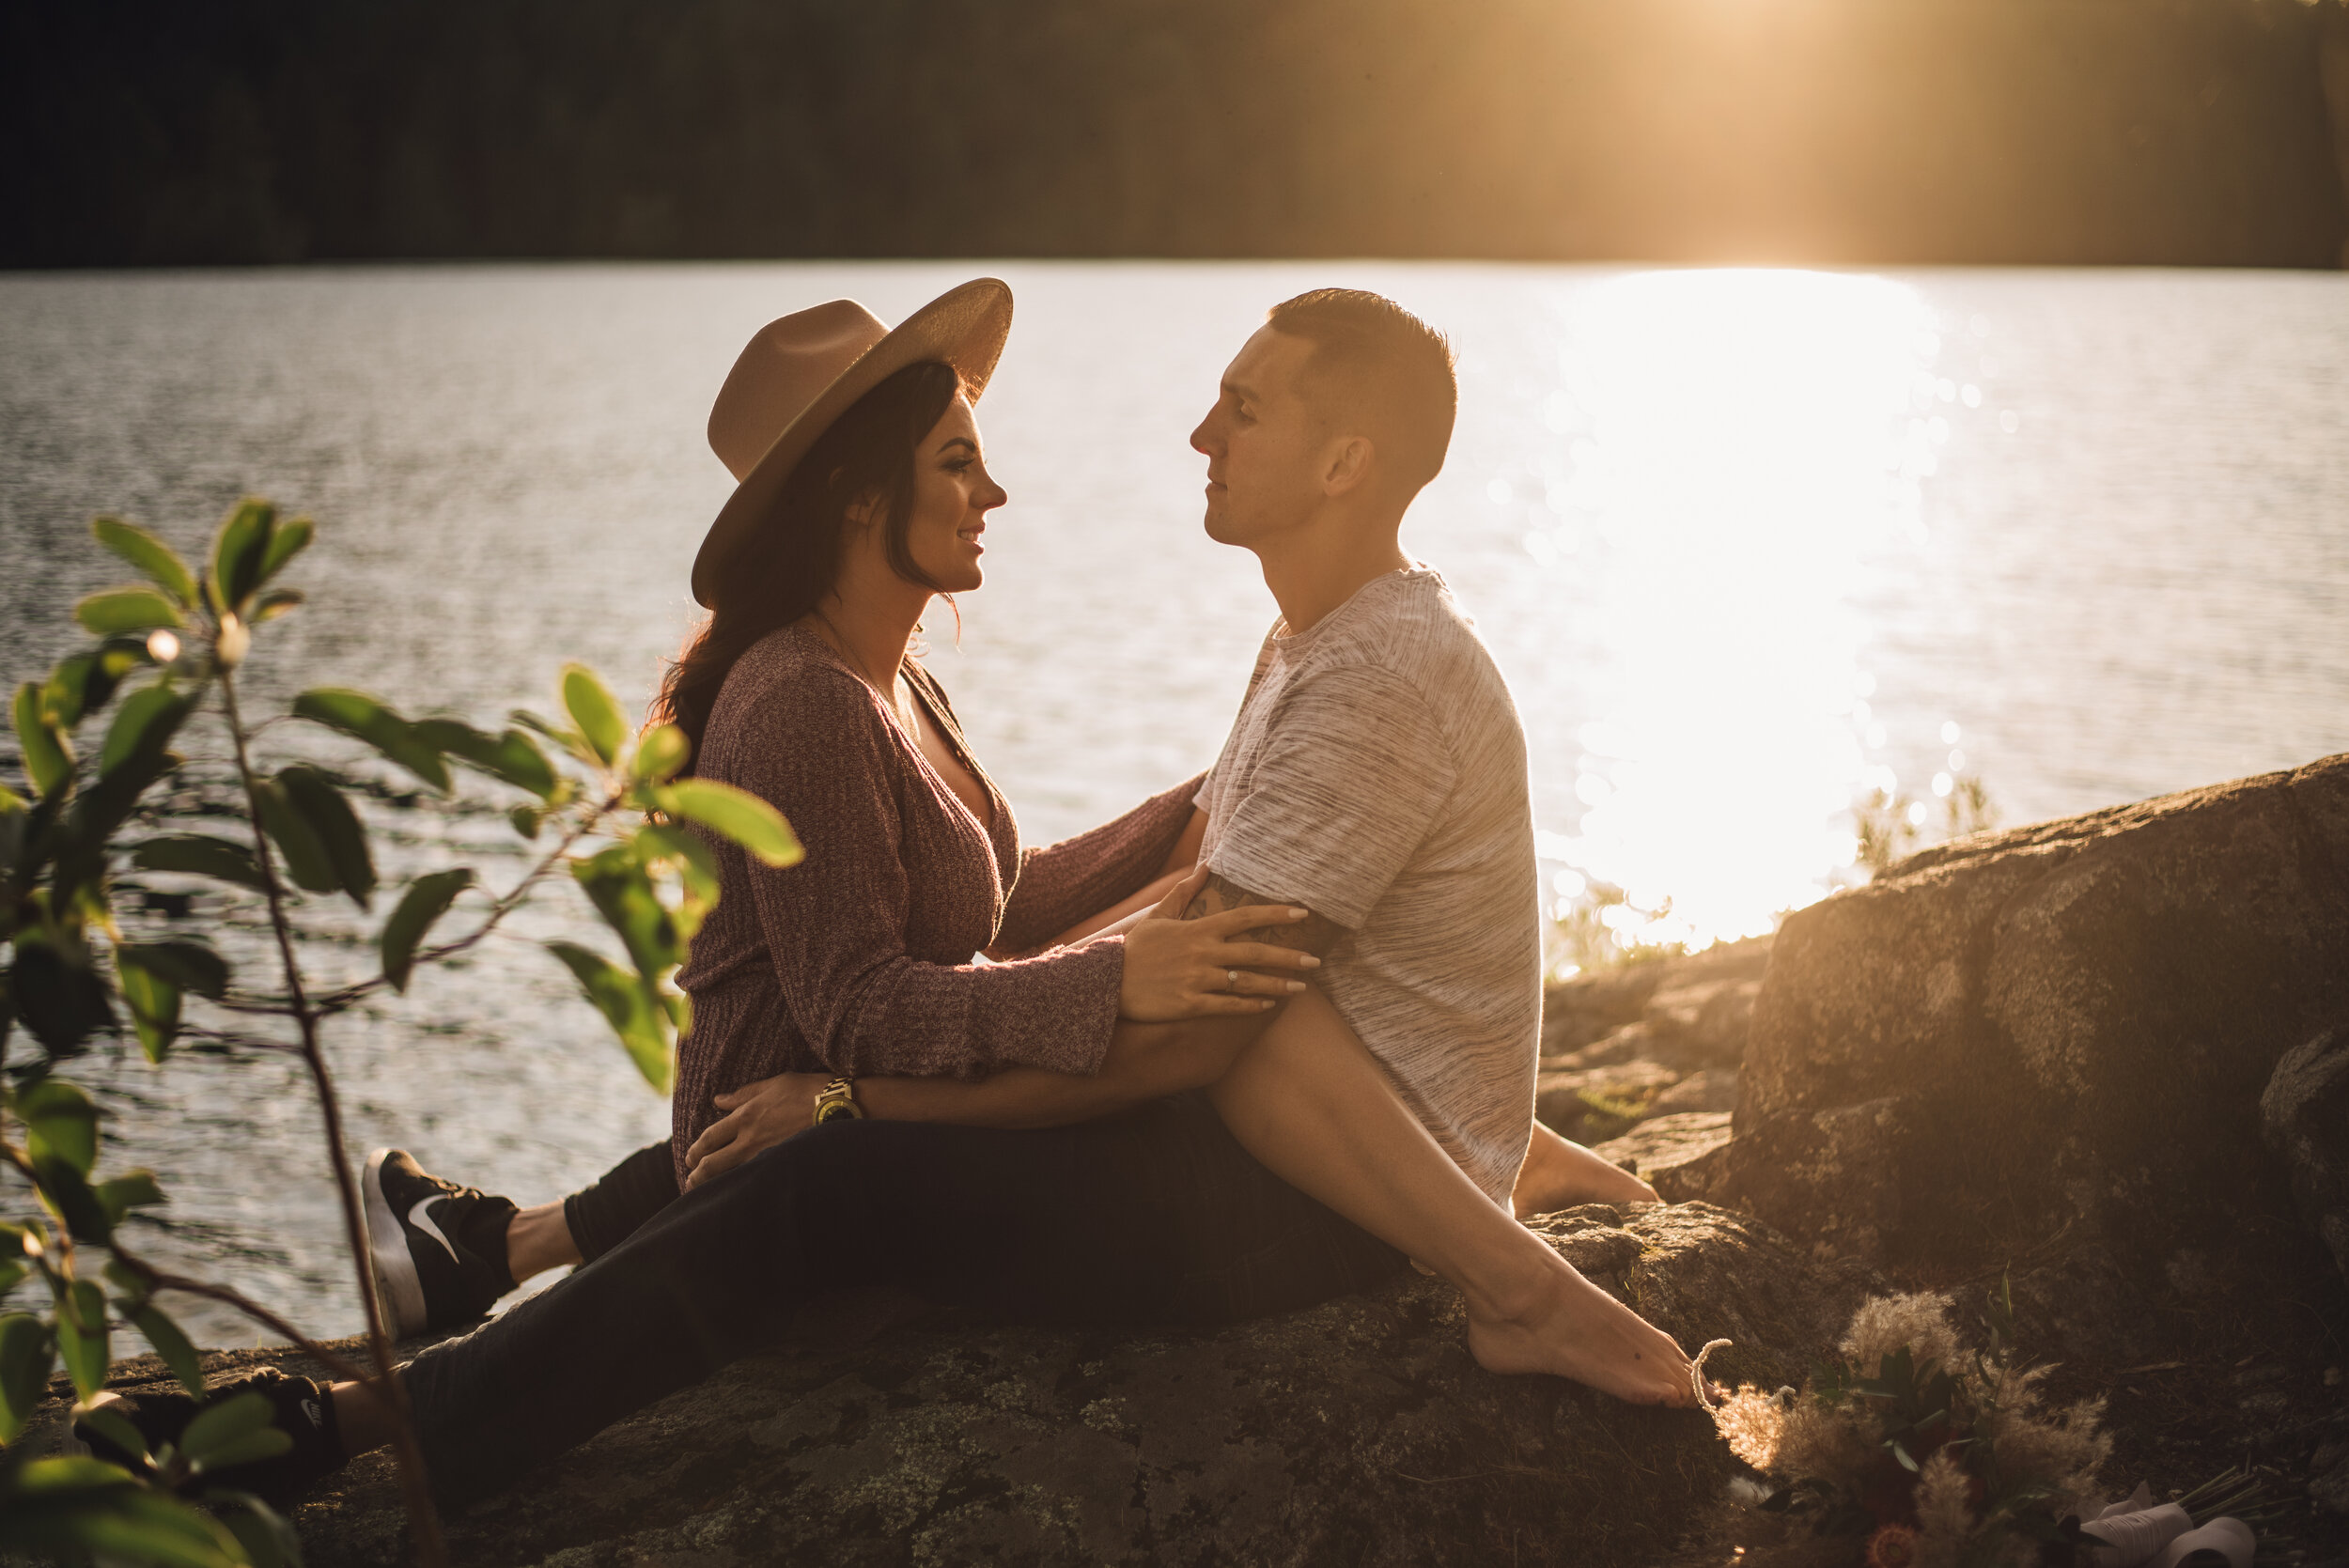 Caitlin & Kevin - Ruby Lake Engagement Session - Pender Harbour, BC - Laura Olson Photography - Sunshine Coast BC Wedding & Elopement Photographer-4135.jpg